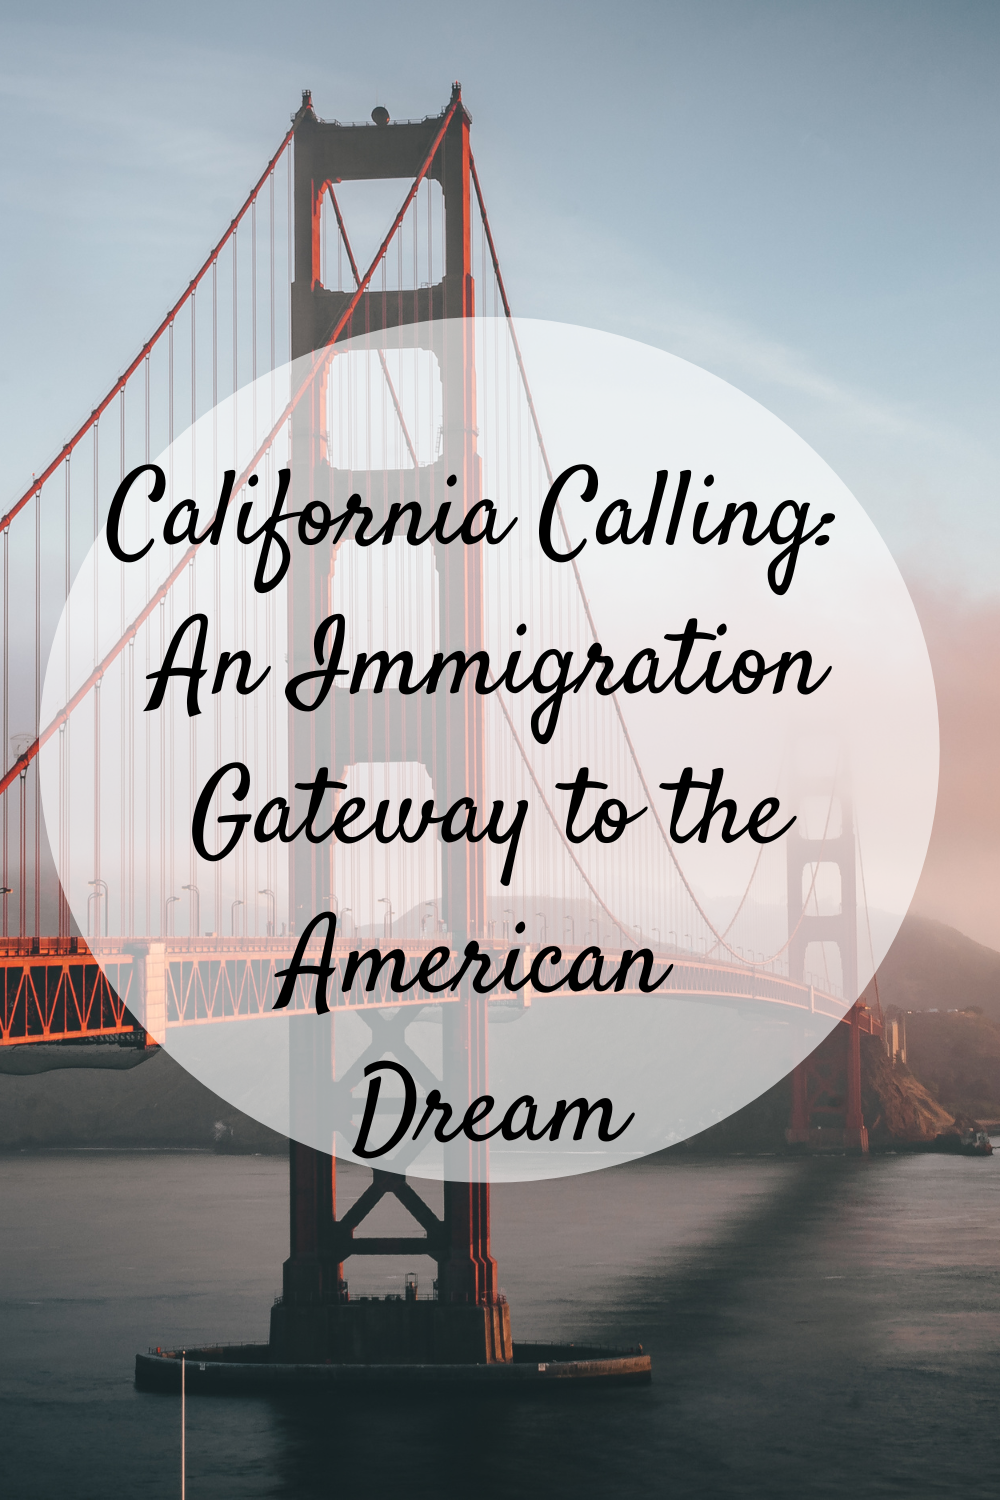 California Calling: An Immigration Gateway to the American Dream